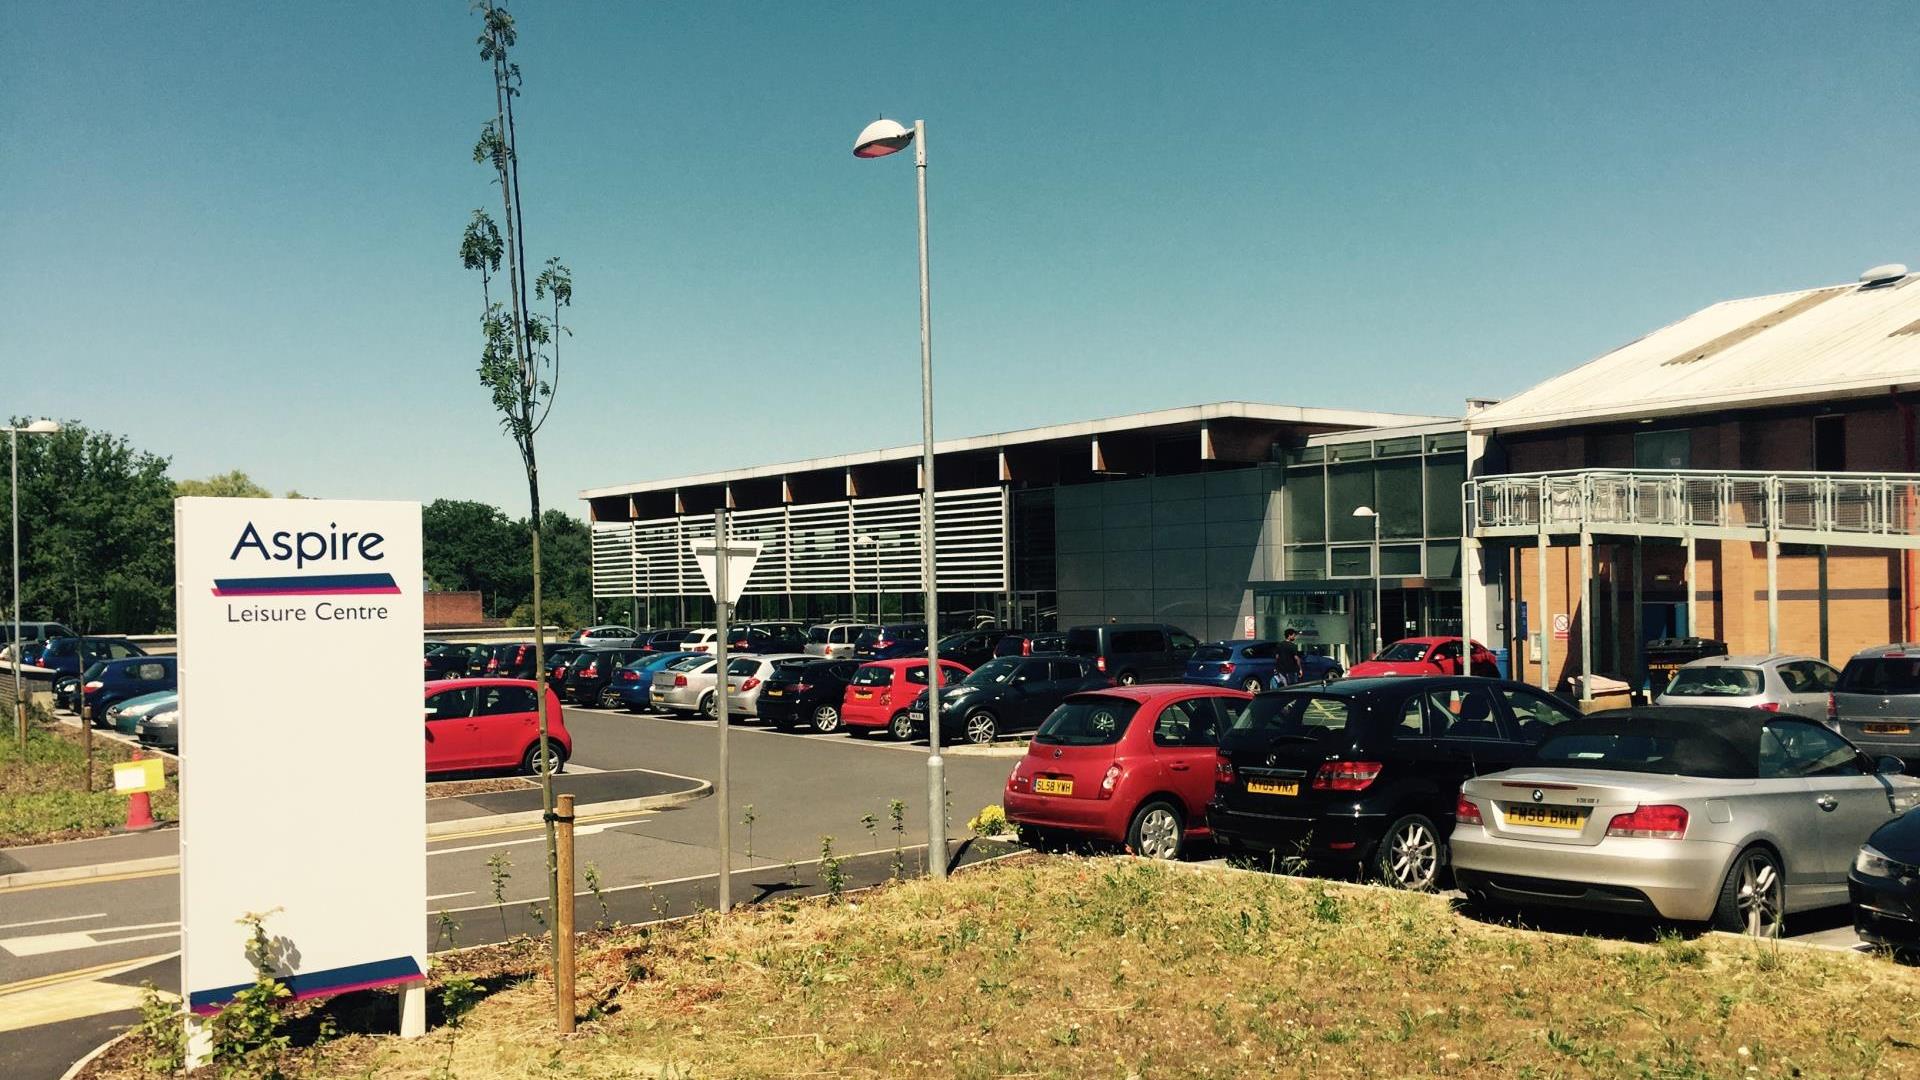 Picture of The Aspire Leisure Centre and car park.